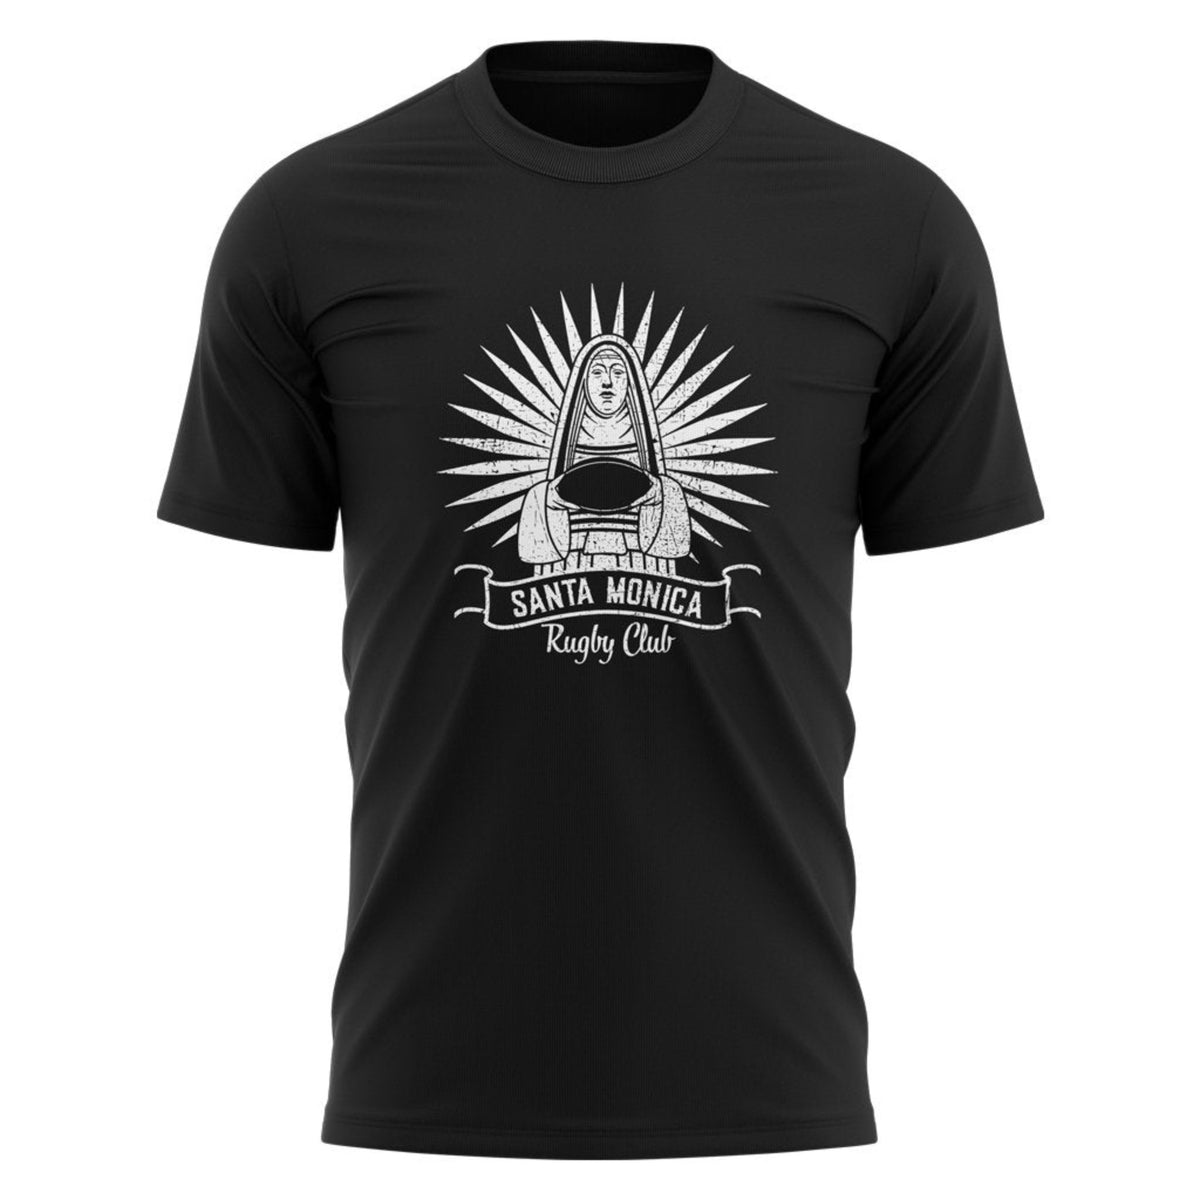 Santa Monica Rugby Club &quot;Saintly&quot; Tee - Men&#39;s Black or Grey - www.therugbyshop.com www.therugbyshop.com MEN&#39;S / BLACK / S SANMAR TEES Santa Monica Rugby Club &quot;Saintly&quot; Tee - Men&#39;s Black or Grey